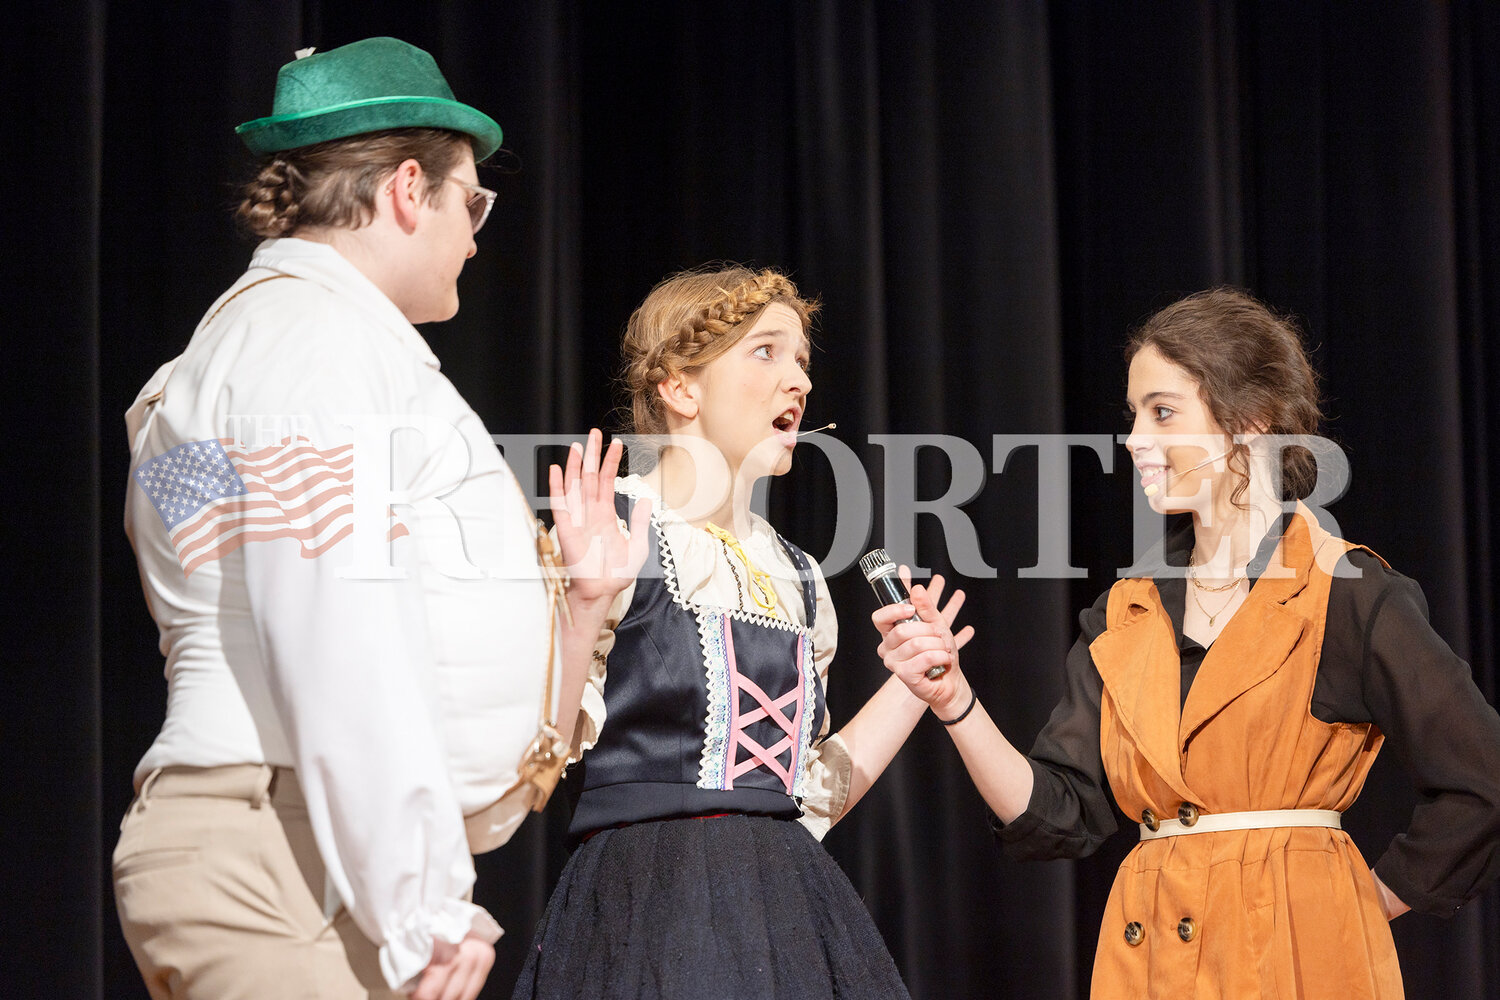 From left, Augustus Gloop played by Jacob Morse, Mrs. Gloop played by Kahrin Vesterfelt, and Penelope Trout played by Leila Pedro, perform Saturday, March 23.